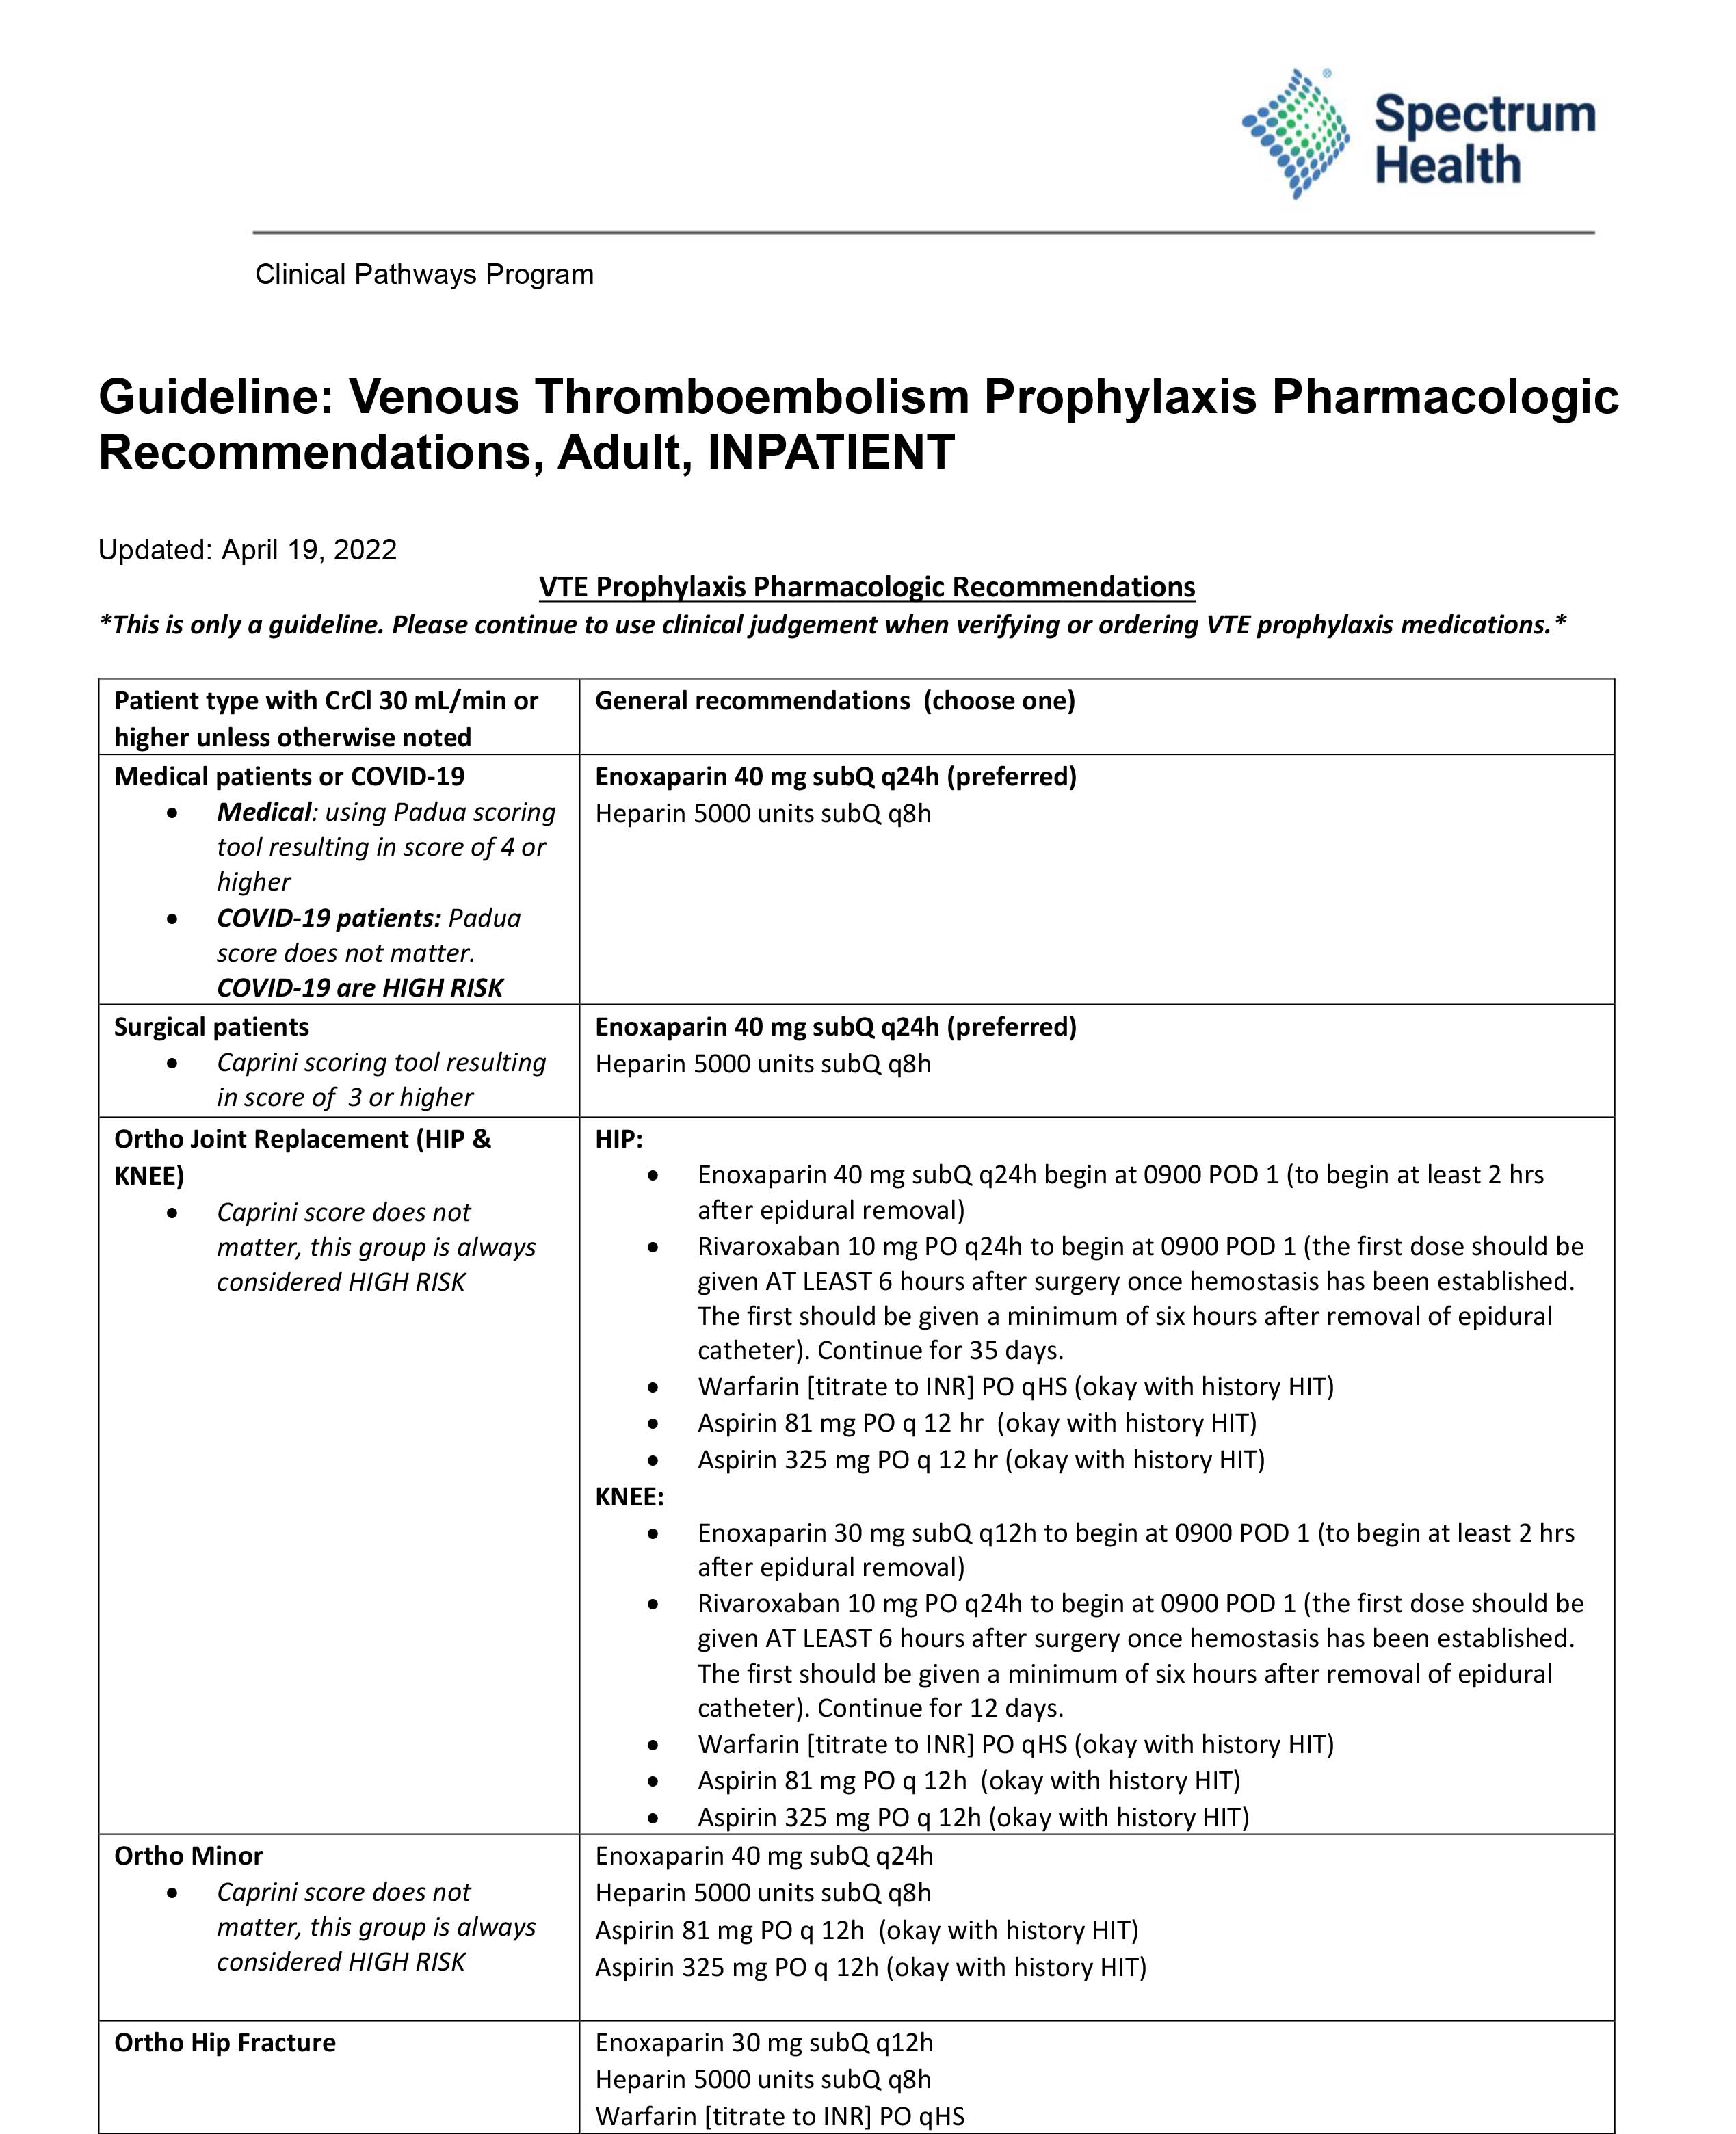 vte prophylaxis pharmacologic recommendation guideline one